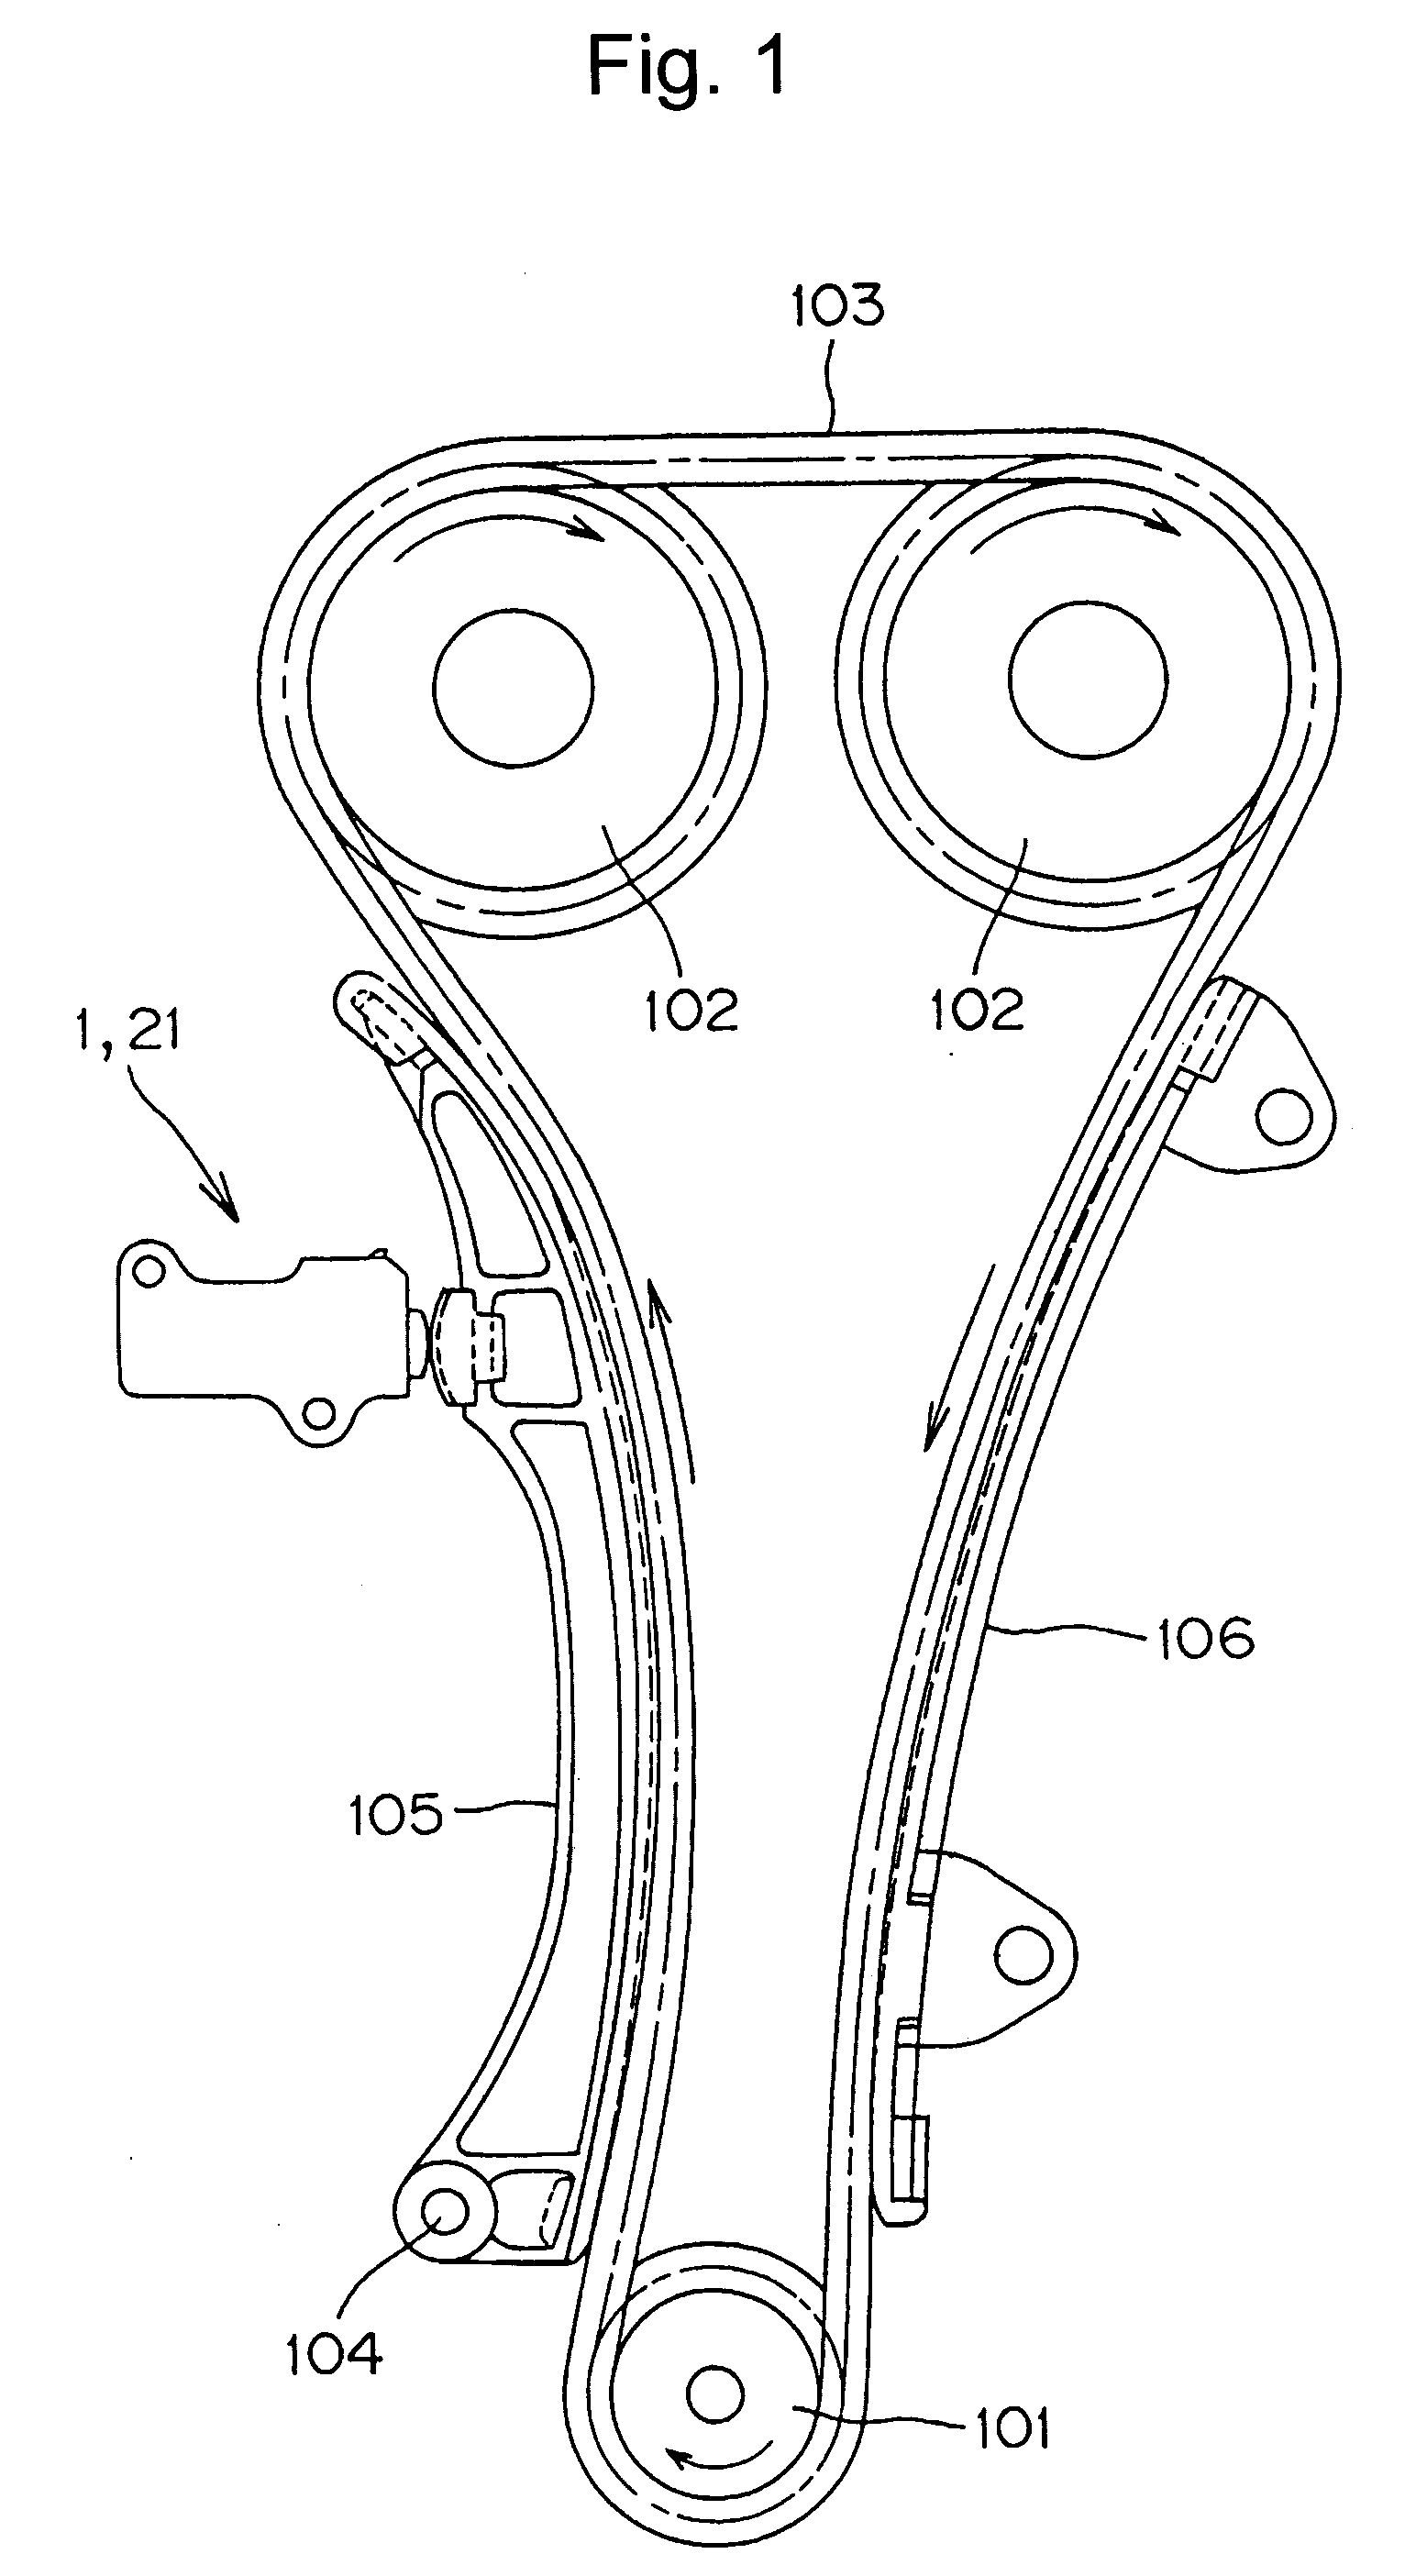 Hydraulic tensioner with improved relief valve